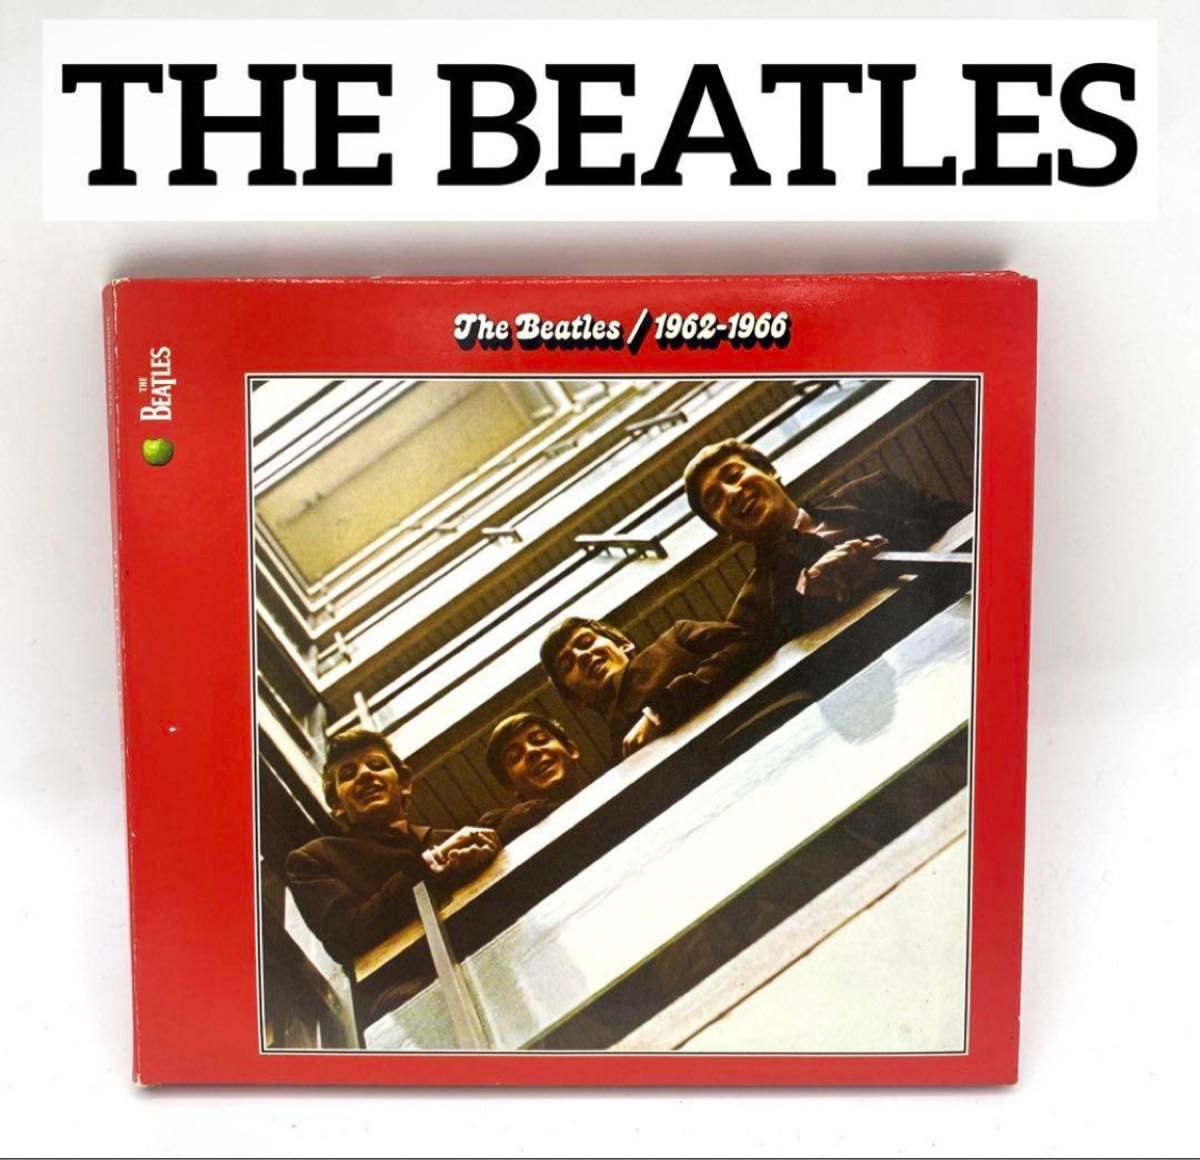 THE BEATLES / 1962-1966 輸入盤